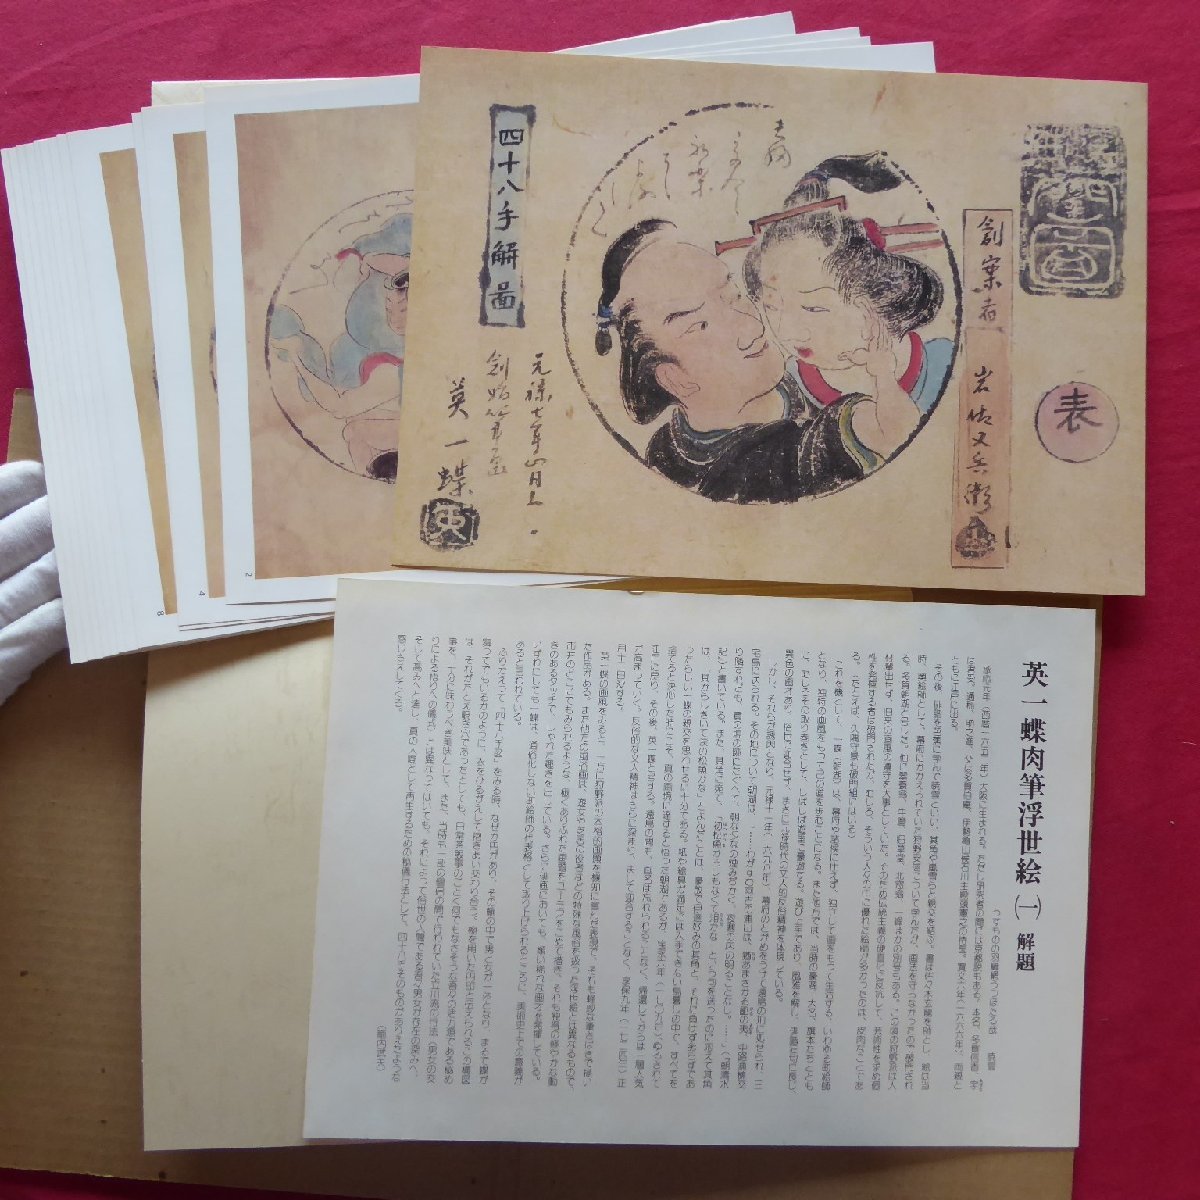 z58[ ukiyoe .. complete set of works all 8 volume ./ modern fine art company * Showa era 54 year ]../ britain one butterfly ( one * two )/ earth ../. river ./ north . series /. gold / curtain end / autograph ukiyoe 